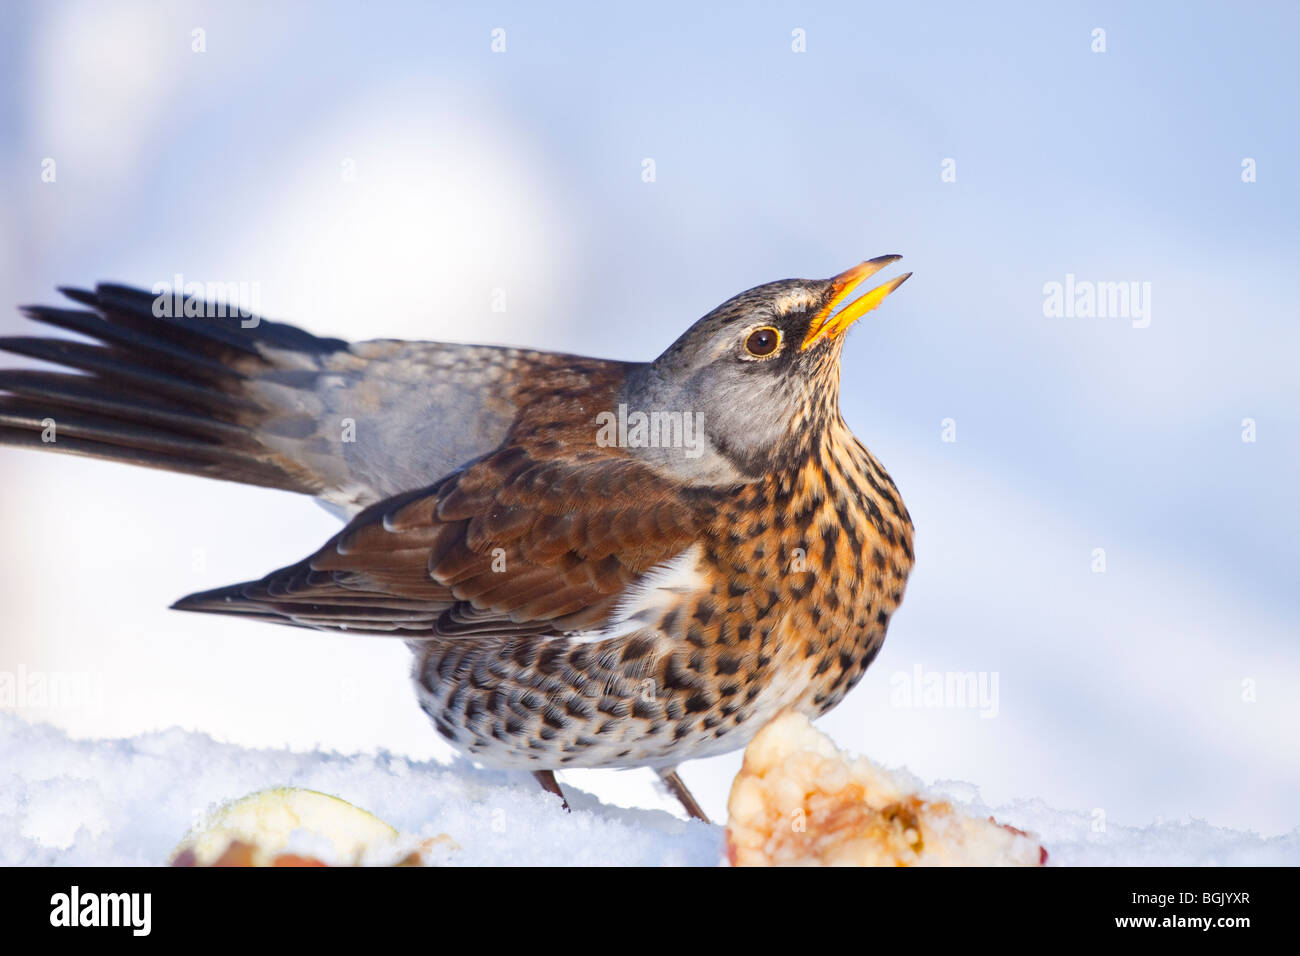 Fieldfare startled by another bird trying to take it's food, in a winter garden, feeding on apples, England, UK Stock Photo